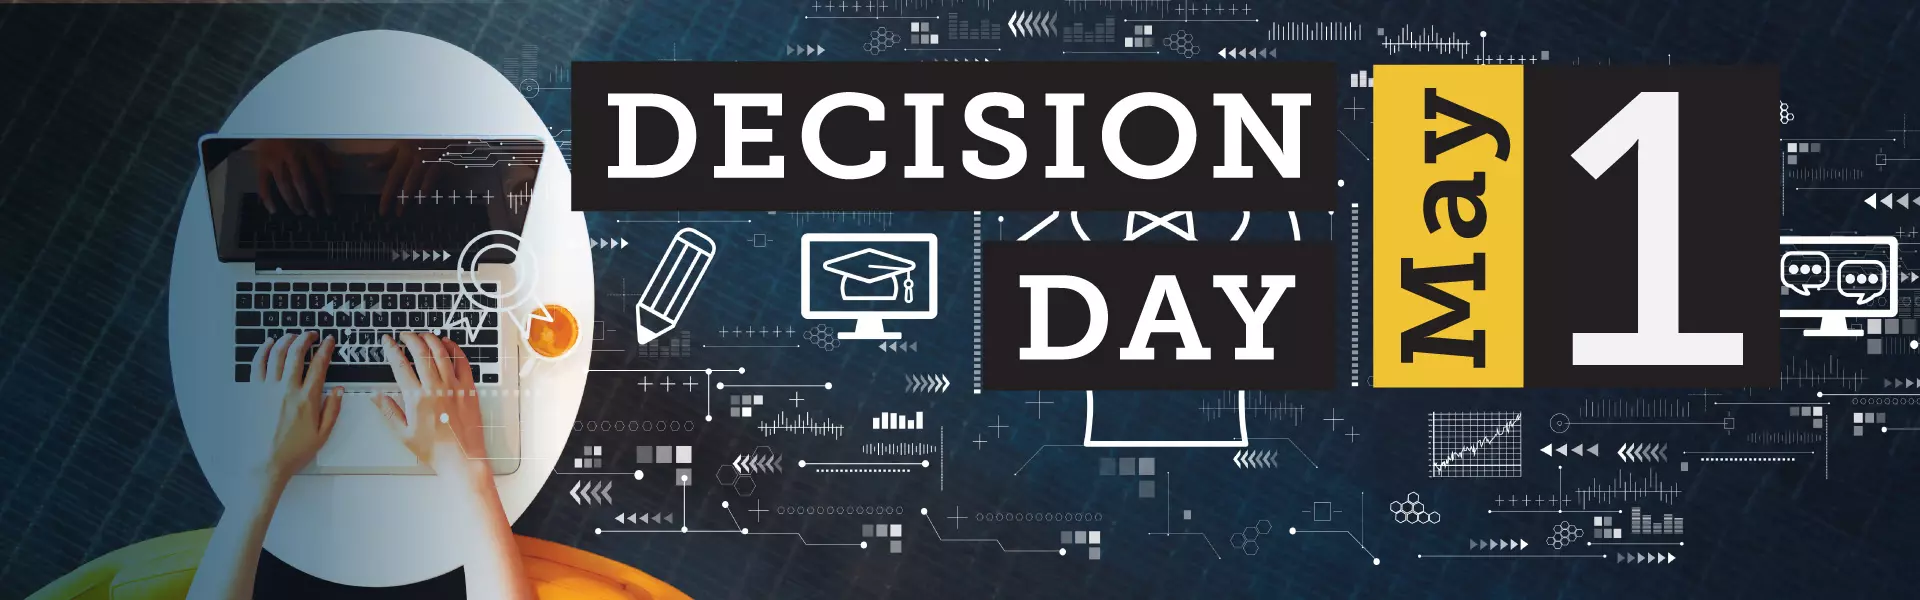 Decision Day May 1